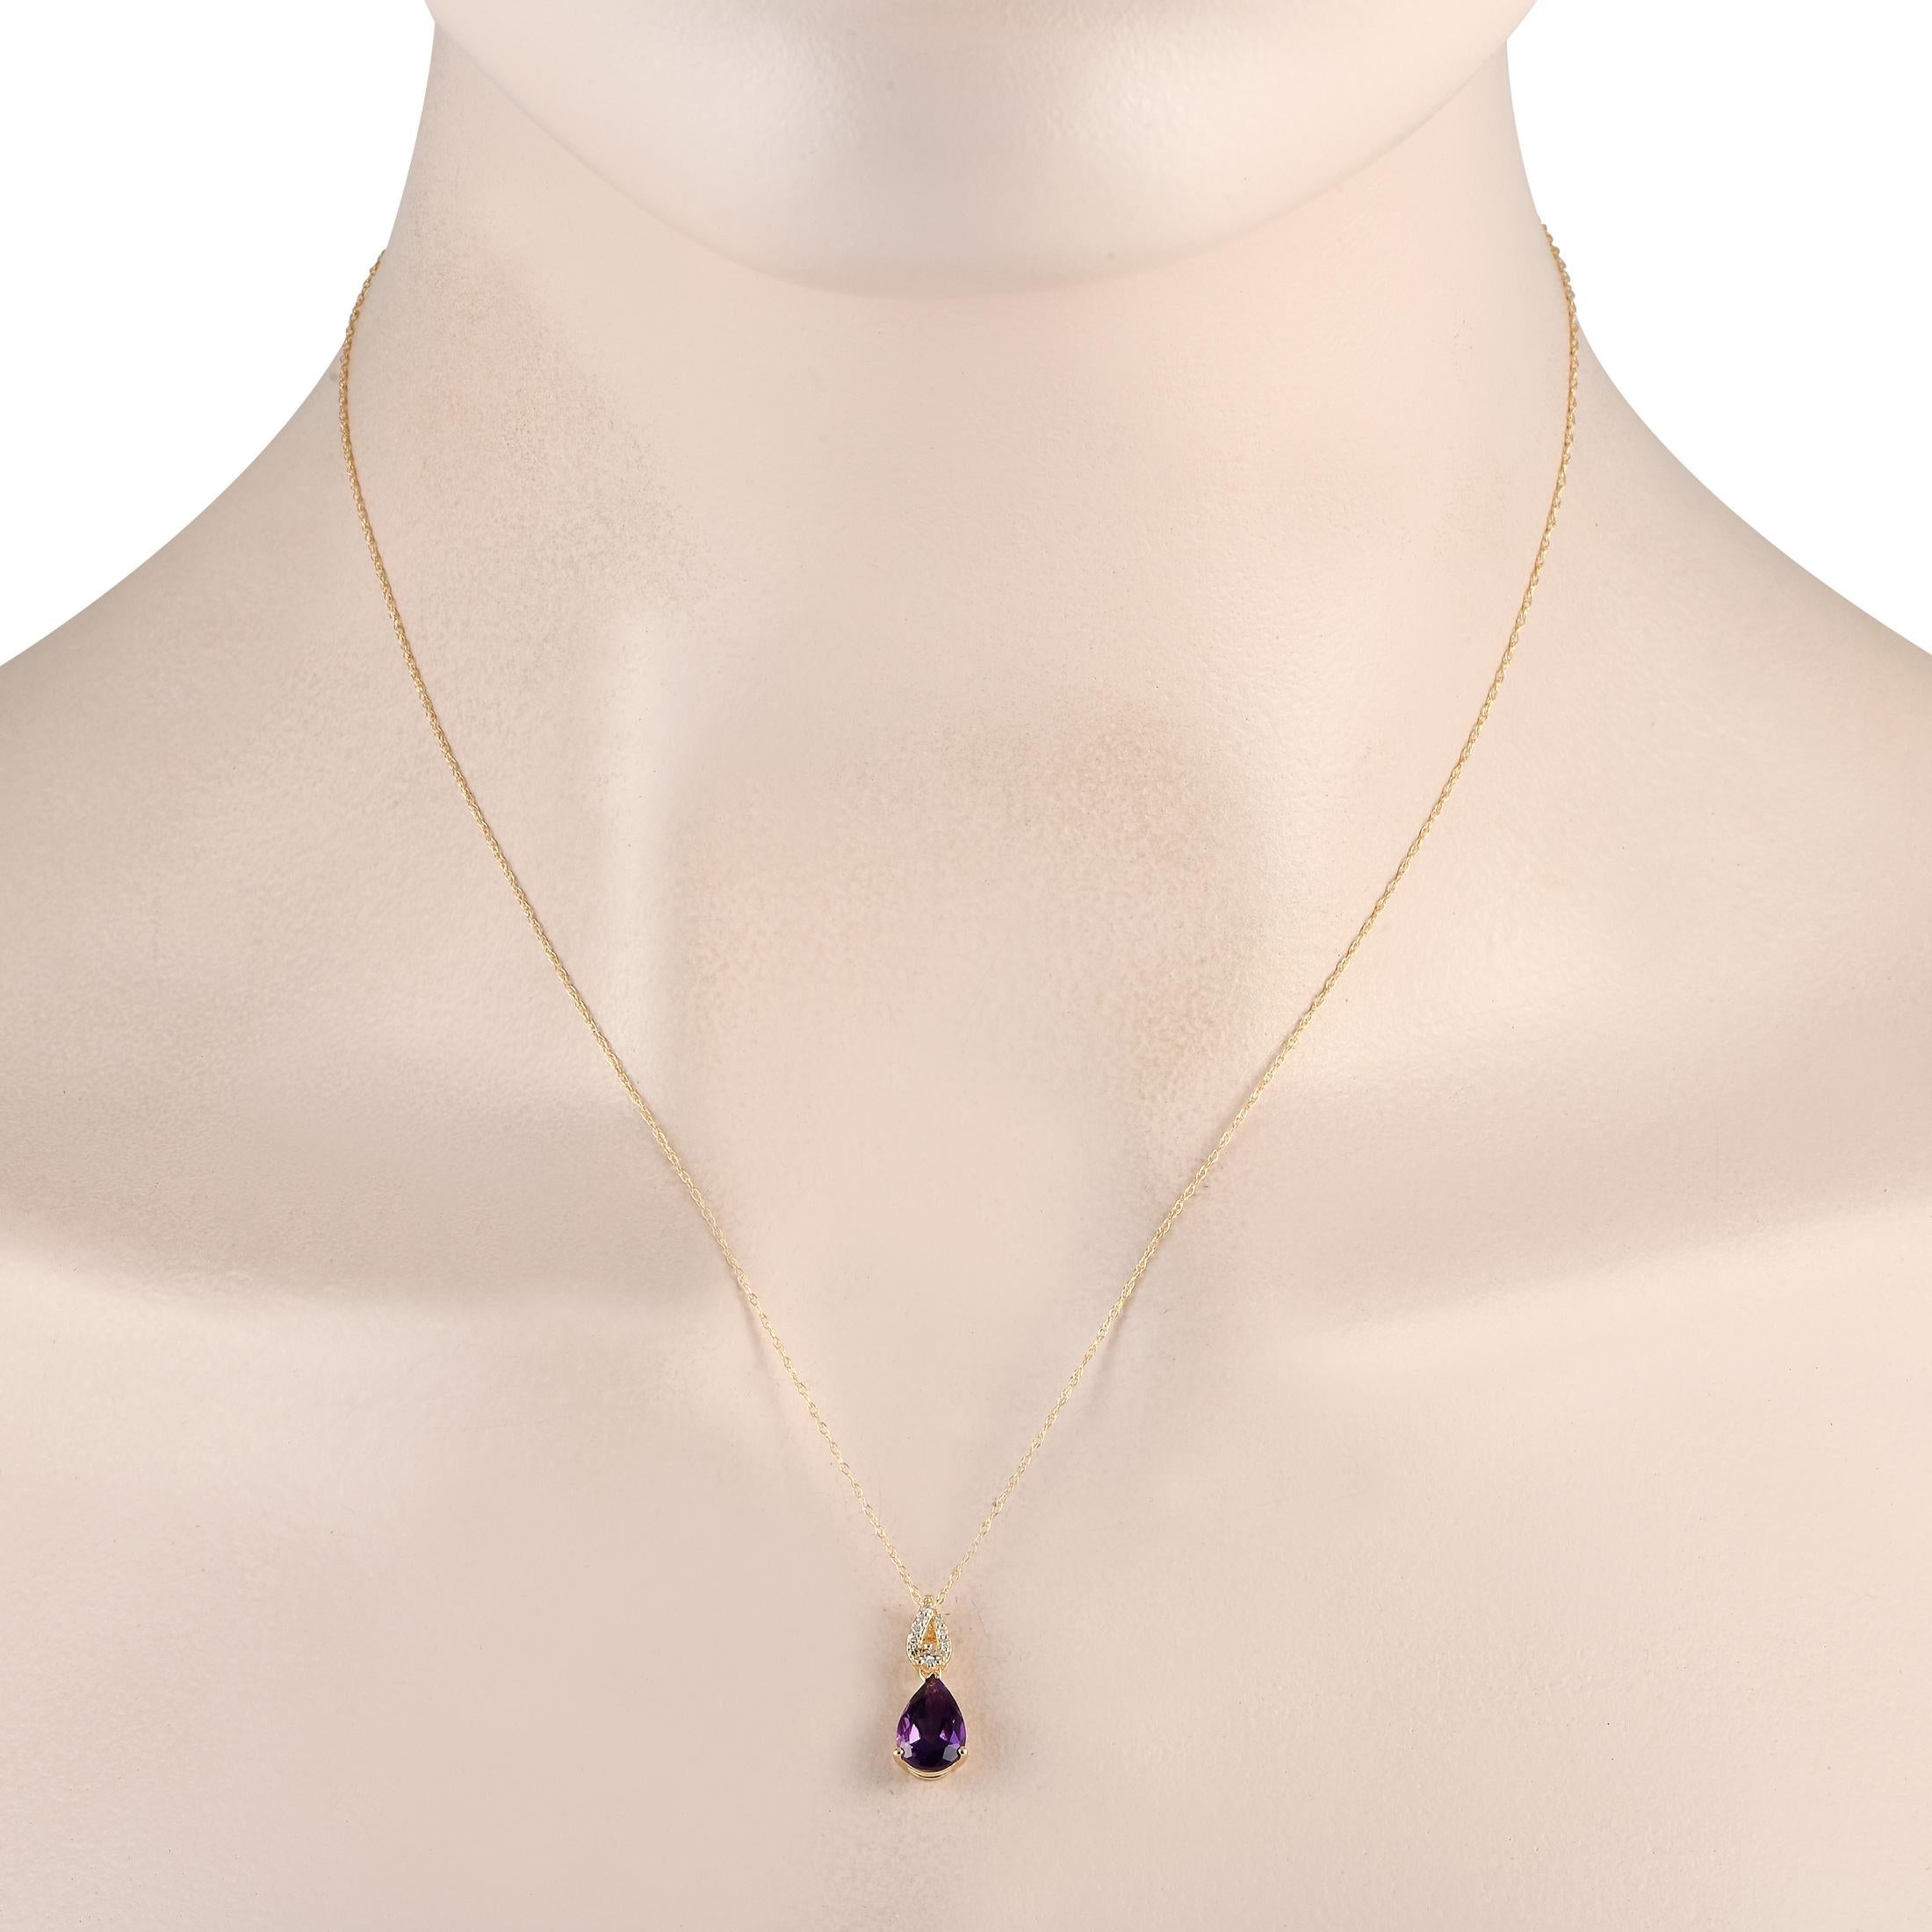 This luxury necklace is charming, timeless, and sophisticated. On this impeccably styled piece, a 14K Yellow Gold pendant beautifully showcases a pear-shaped Amethyst and sparkling Diamonds totaling 0.06 carats. The pendant measures 0.65 long by